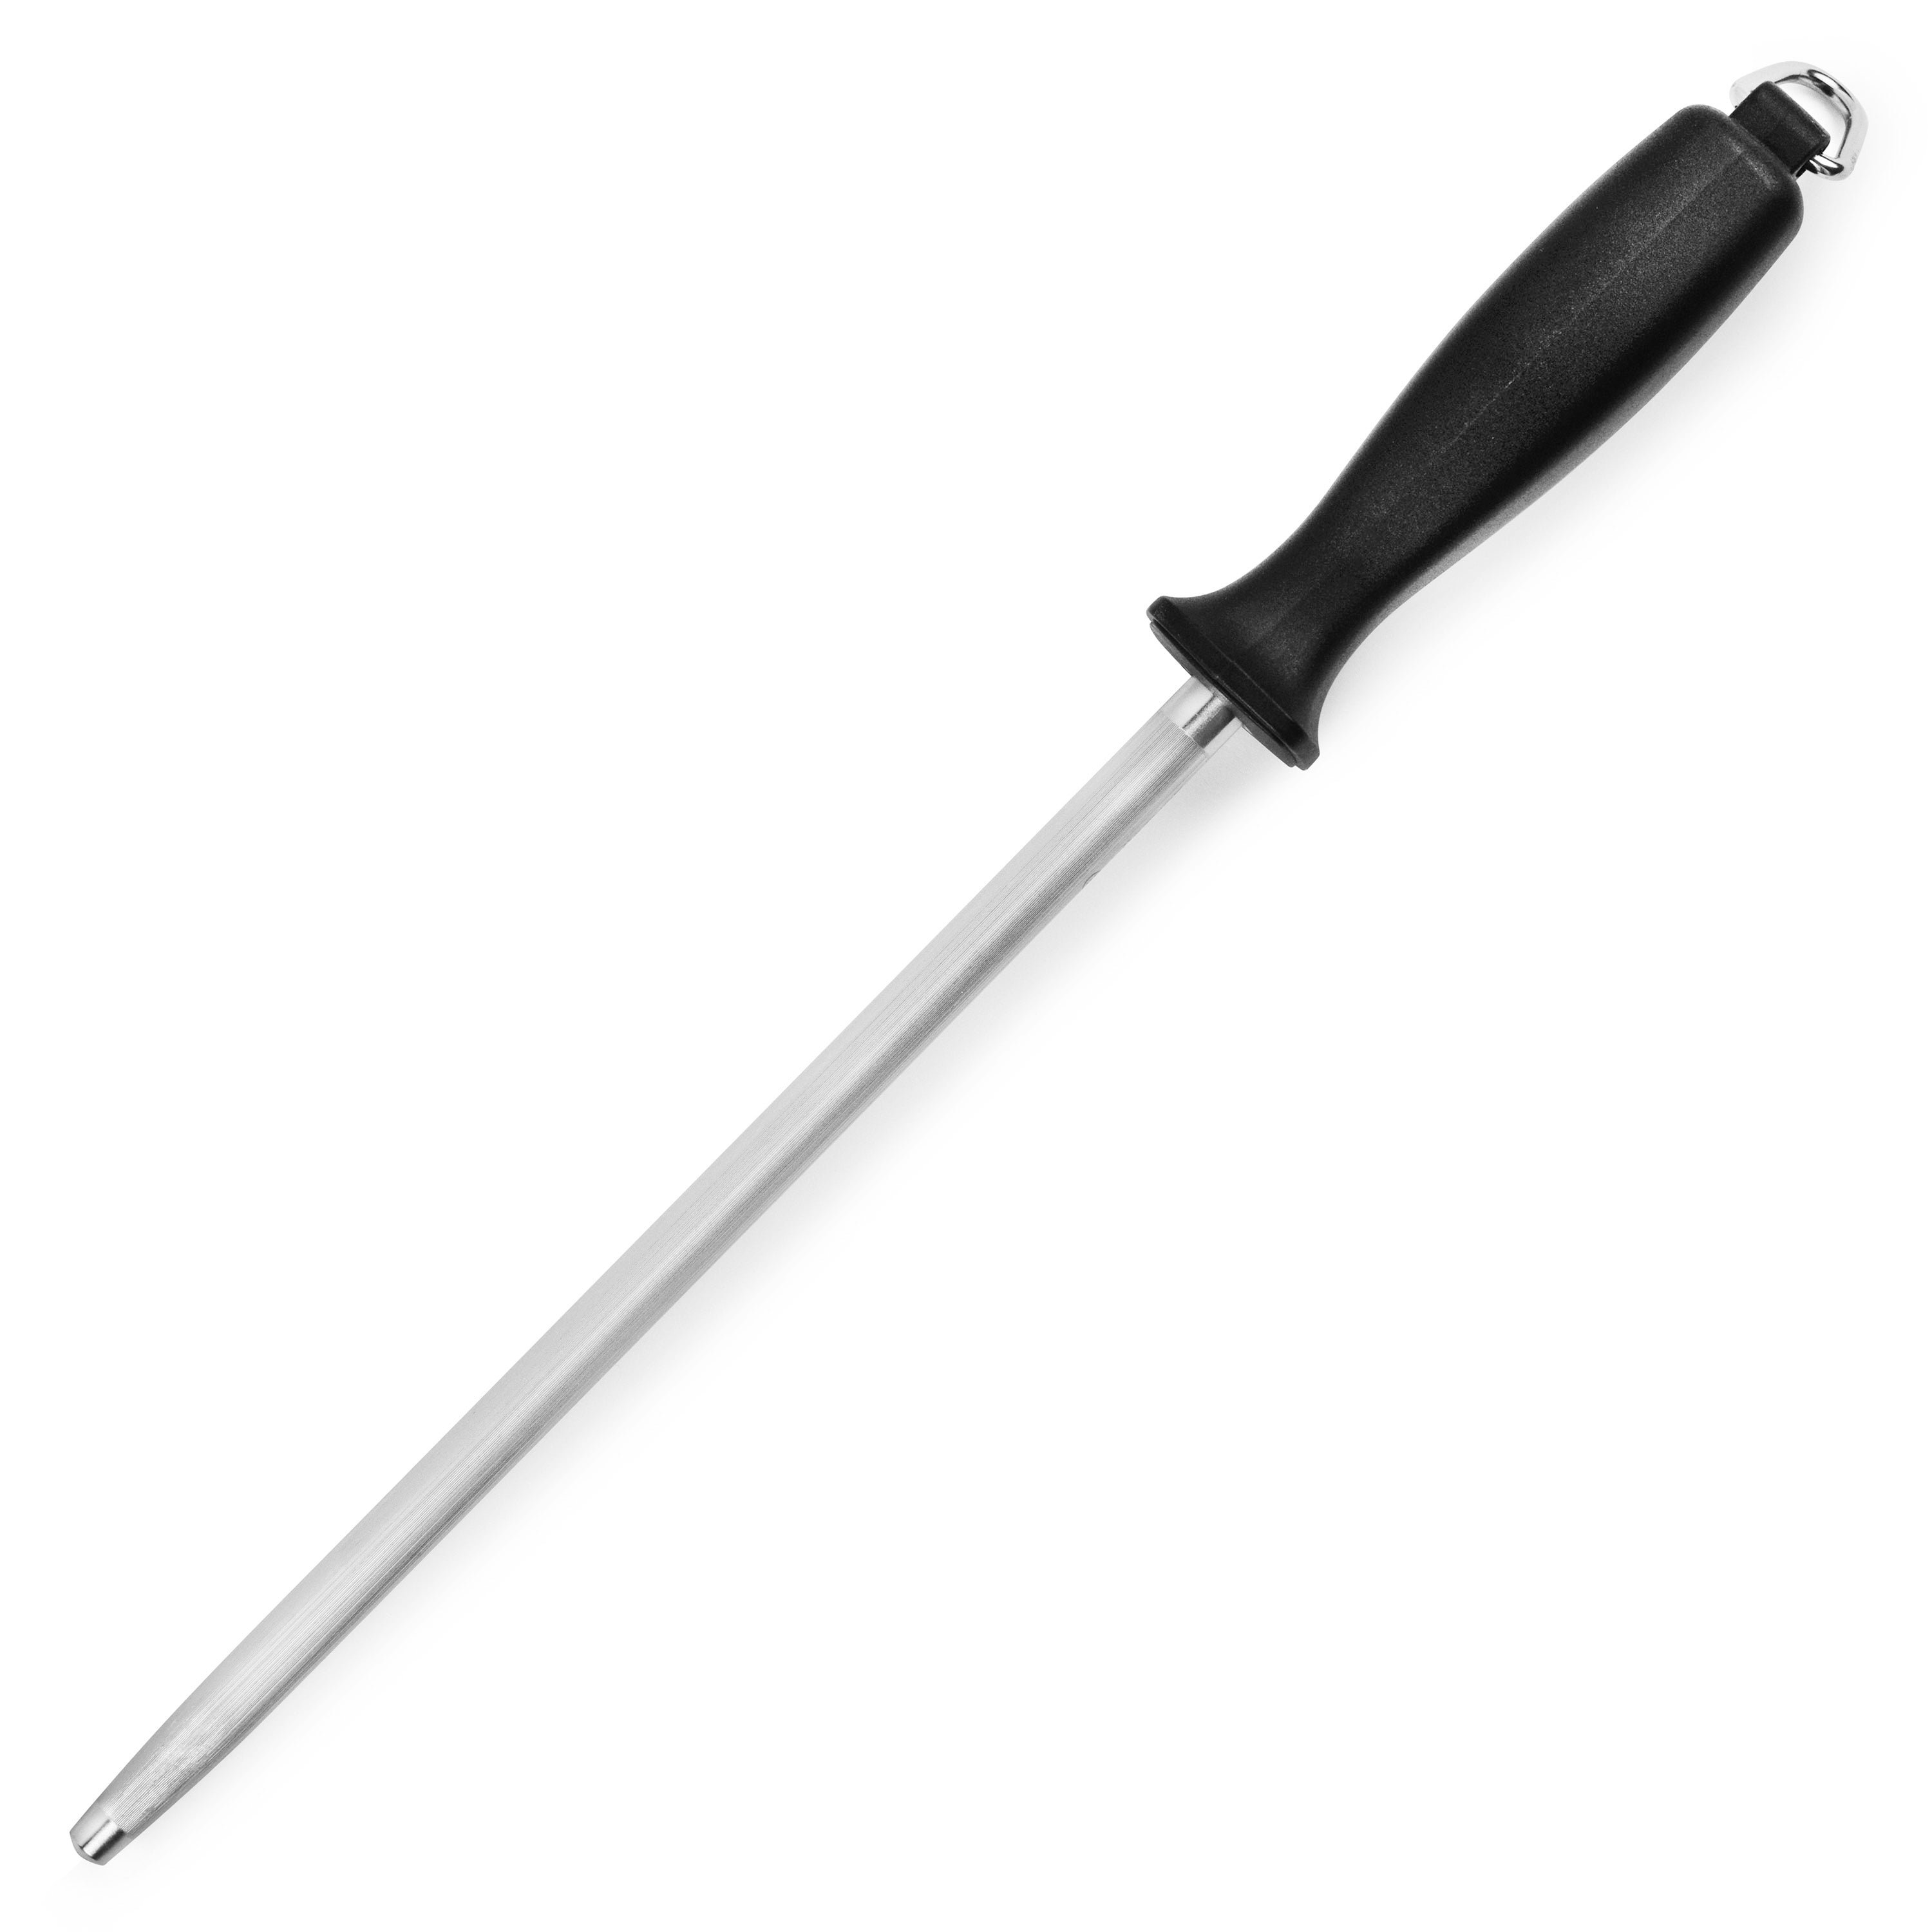 Honing Steel Knife Sharpening Rod 11 inches, Premium Carbon Steel